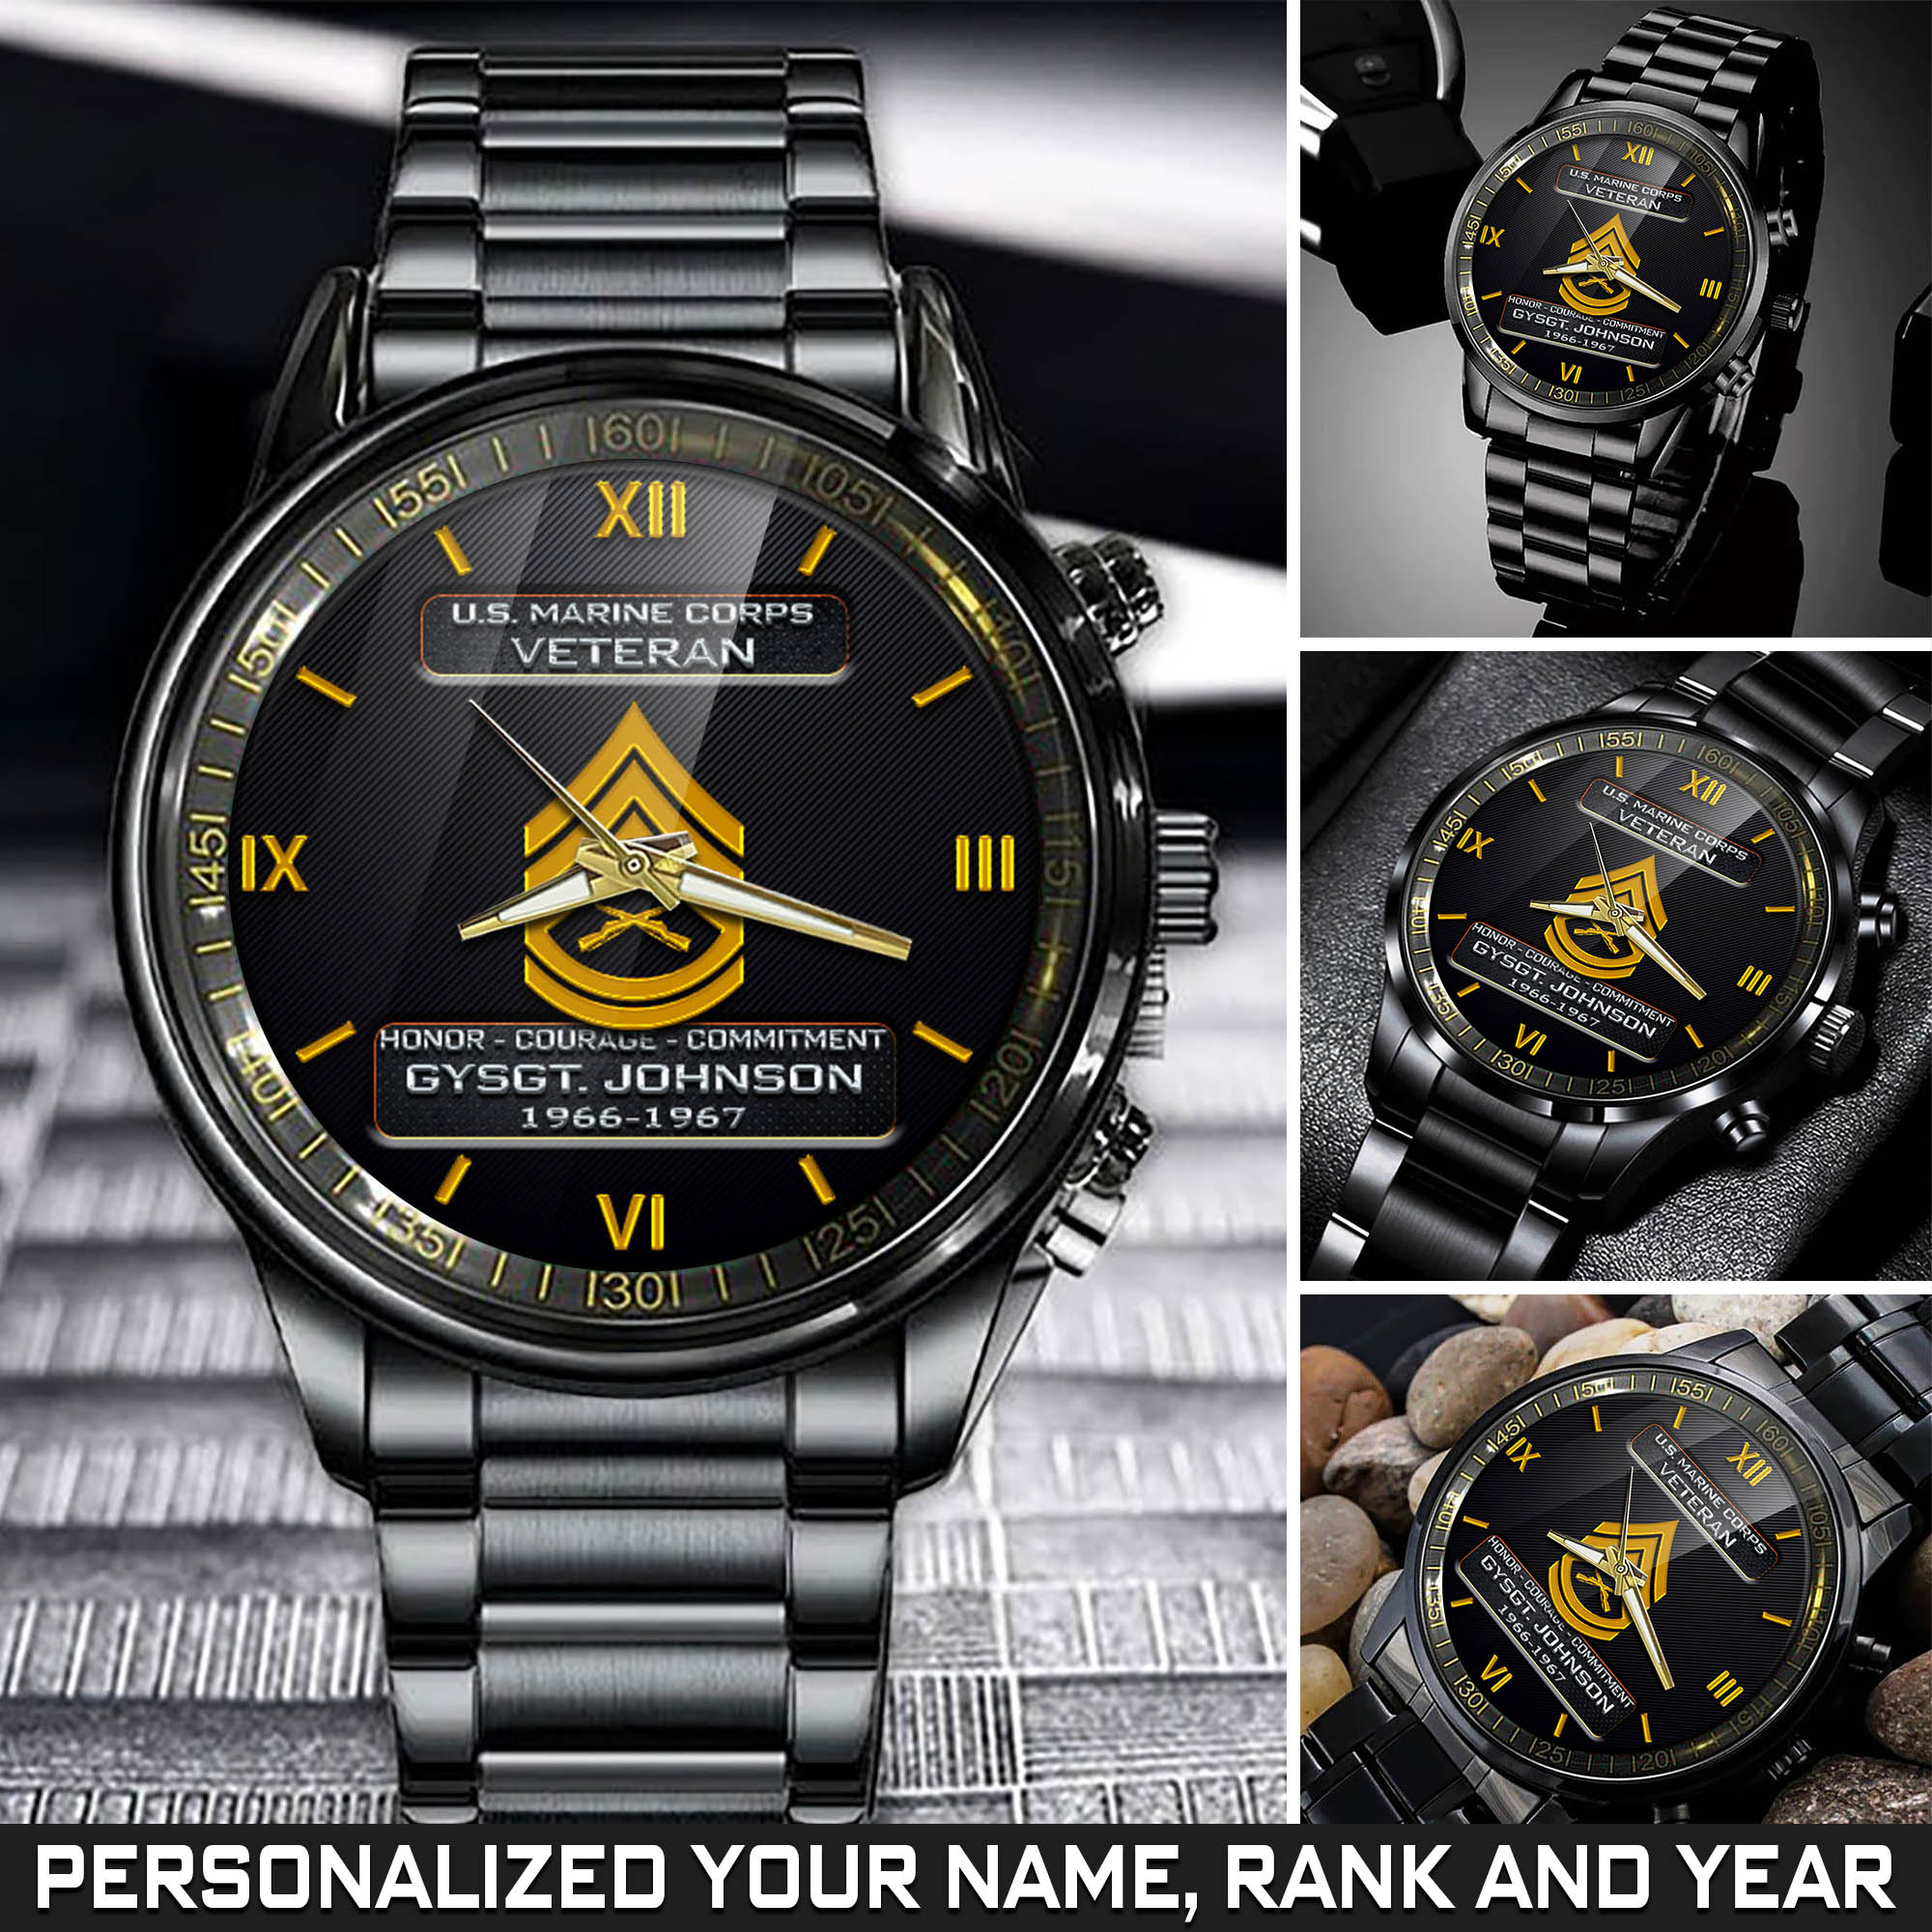 Personalized U.S. Marine Corps Veteran Black Fashion Watch With Your Name, Year And Rank, Military Watch For Veterans, Gift For Veterans ETHY-57684